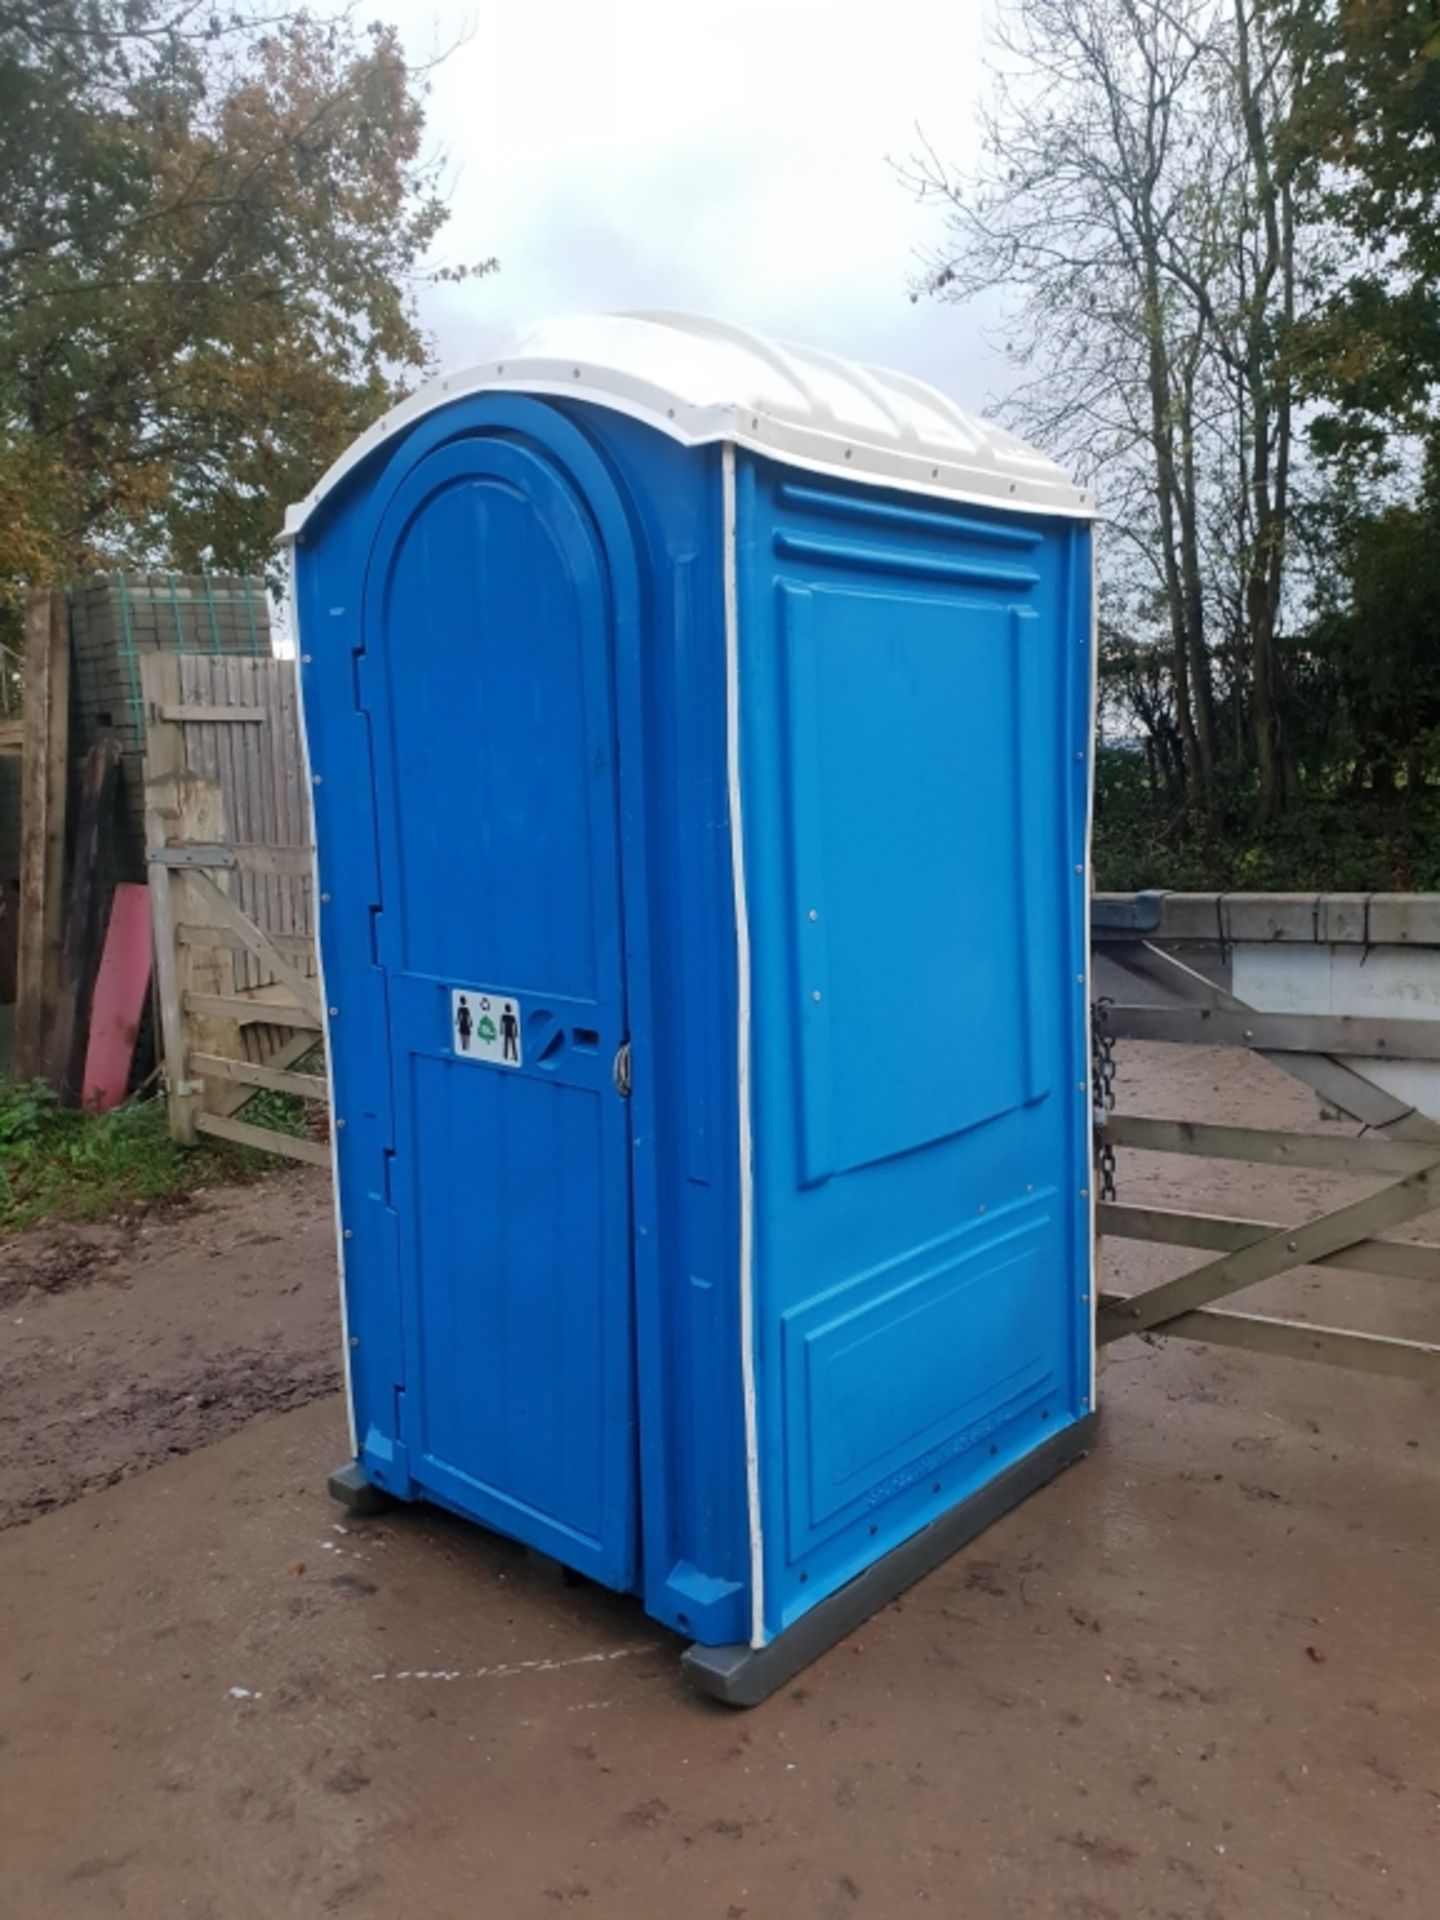 Portable Site Toilet - Image 2 of 4